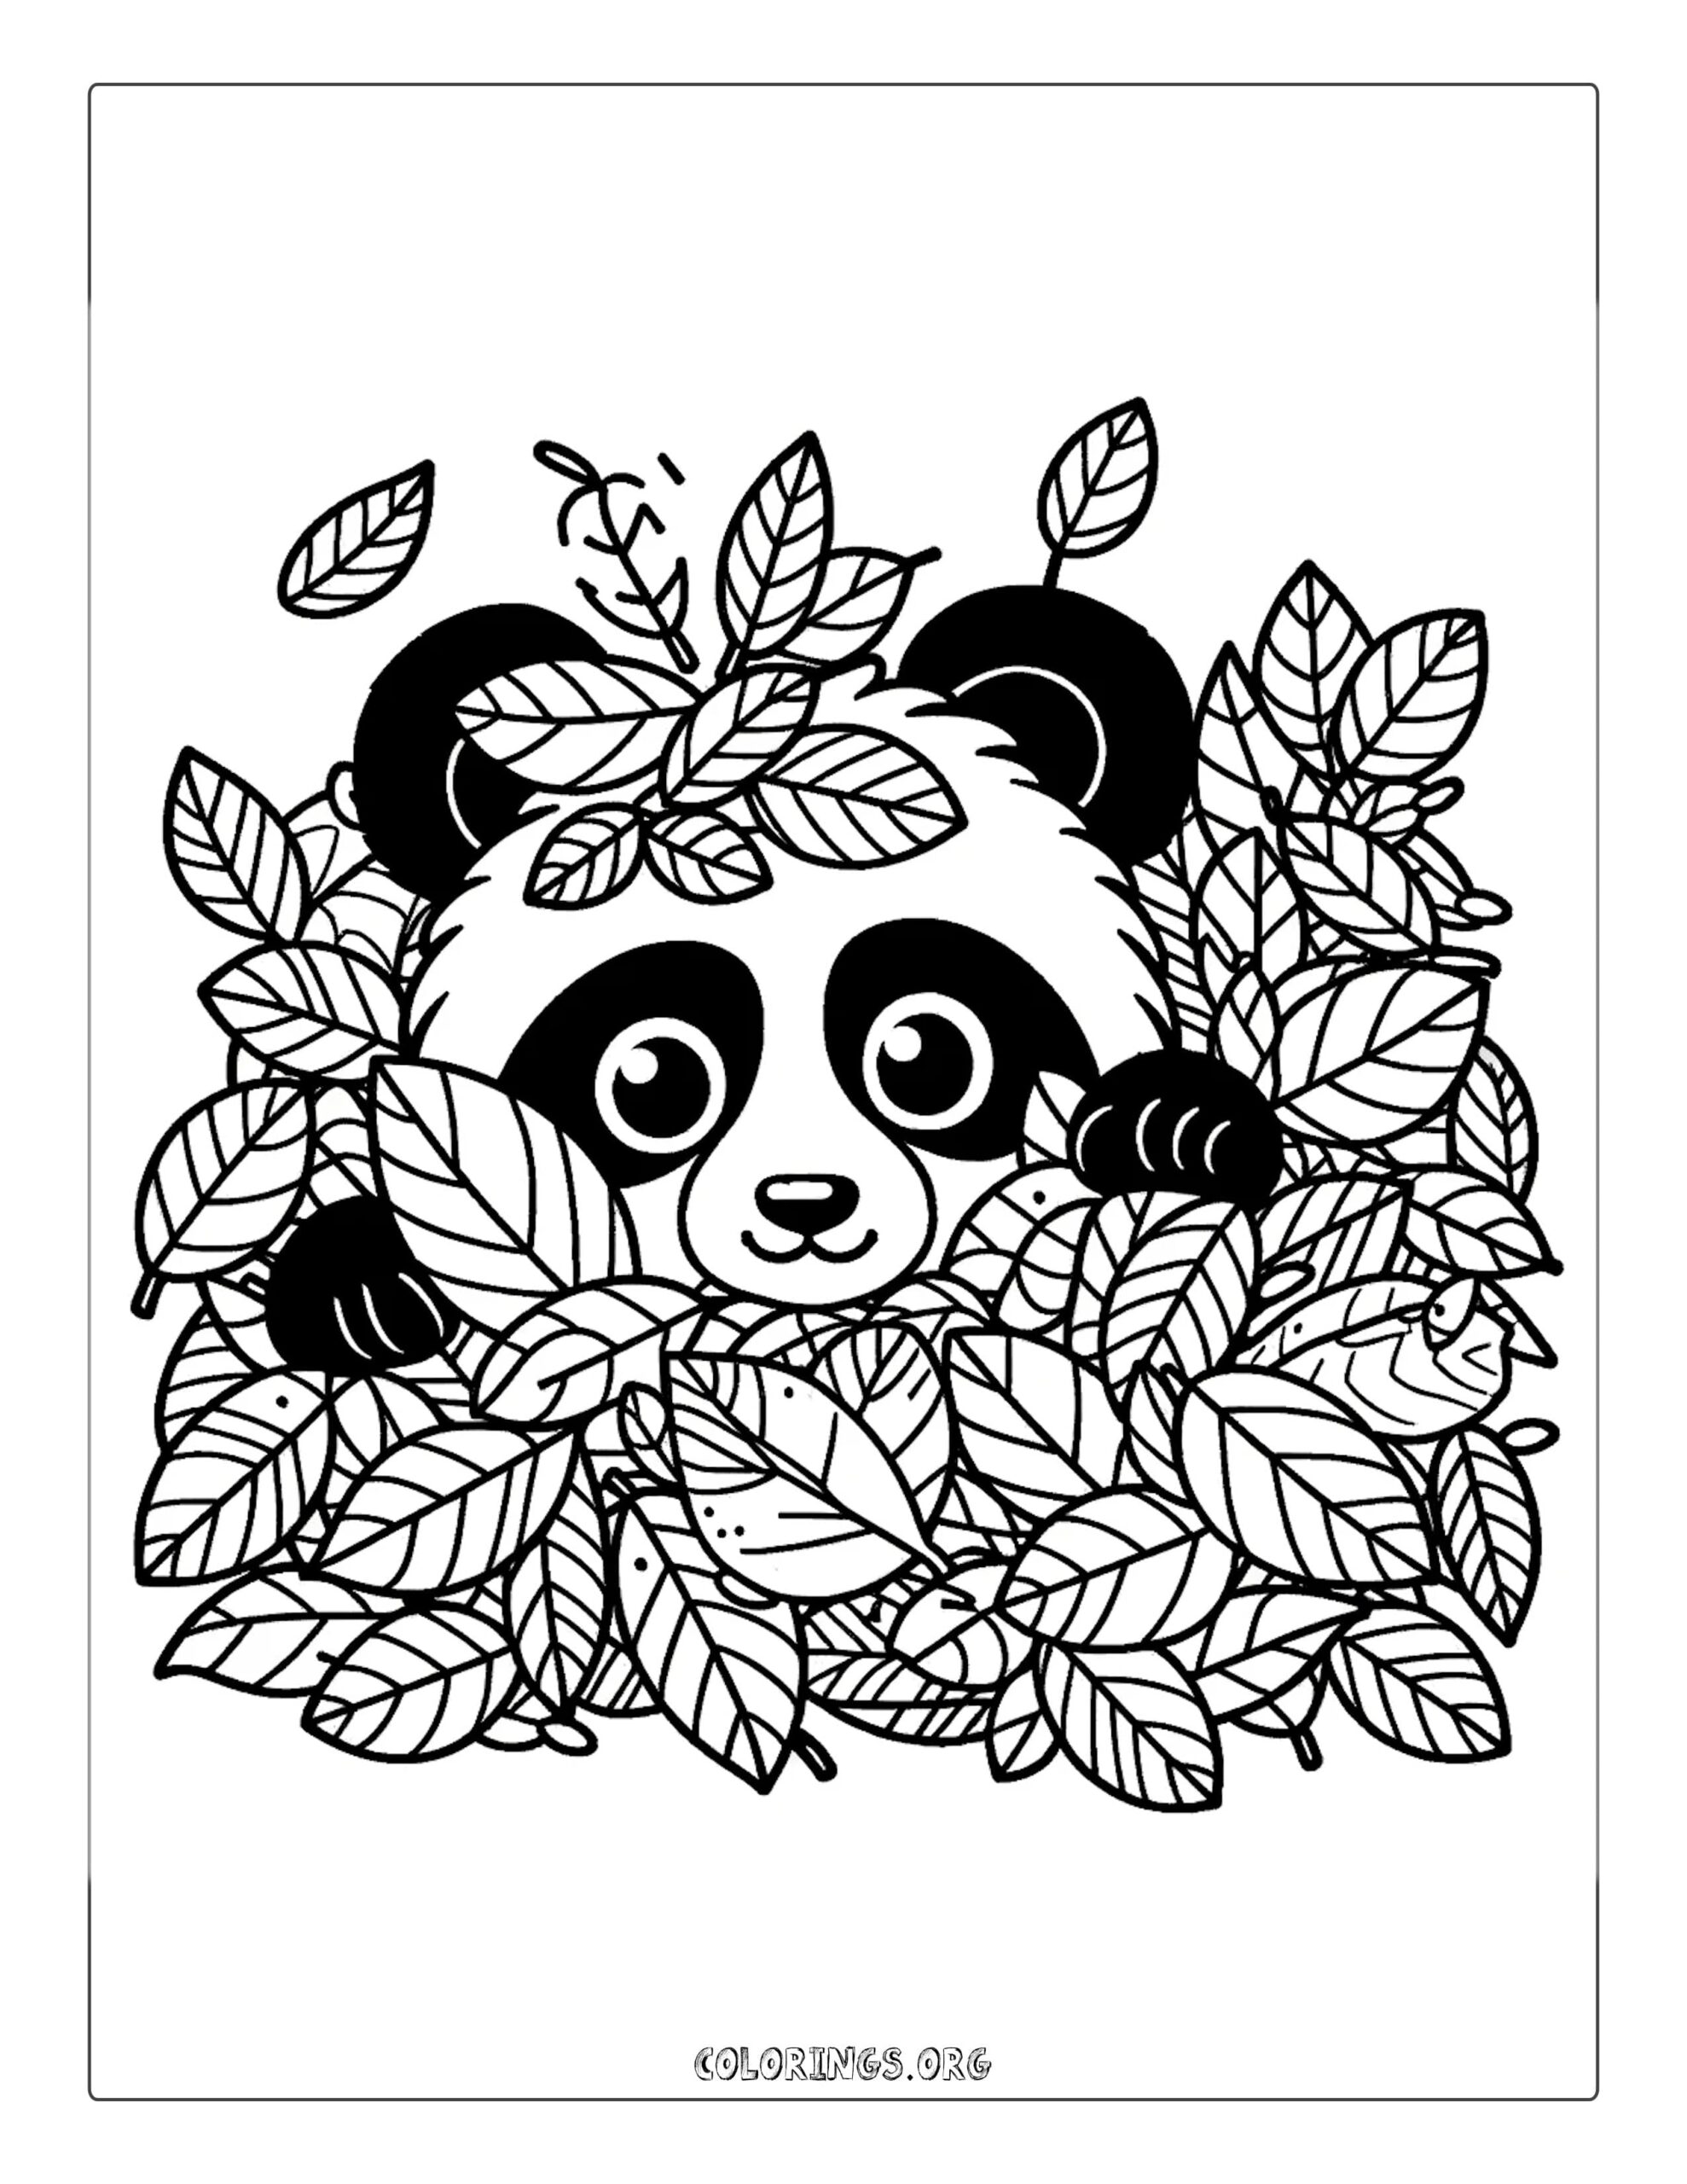 Sneaky Panda in Autumn Leaves Coloring Page